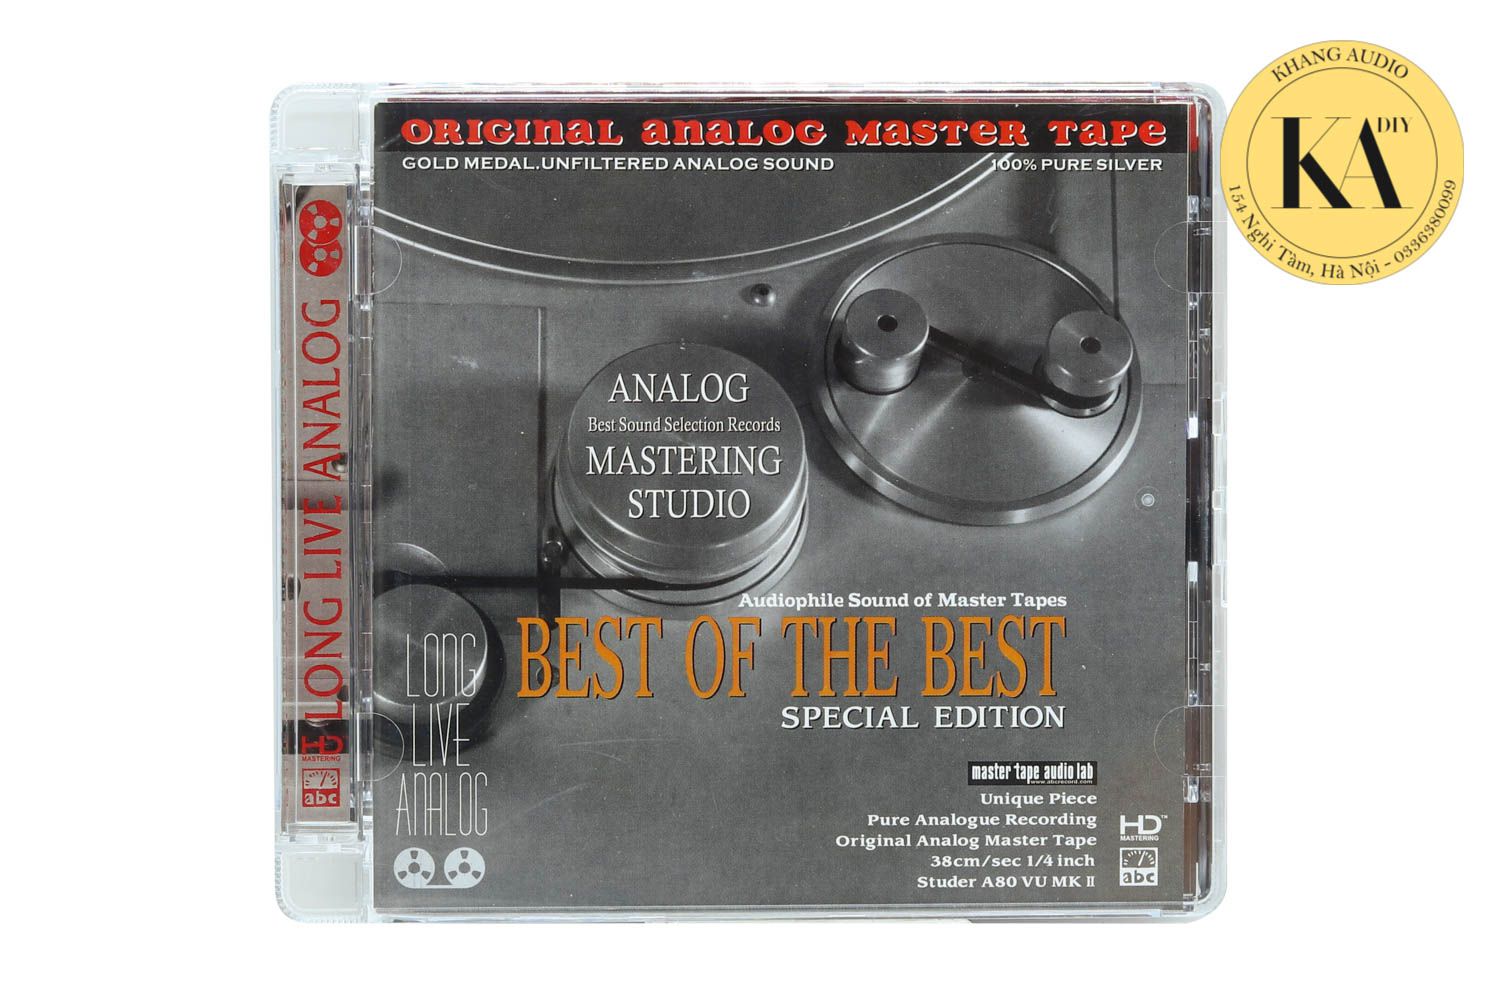 Best Of The Best - Special Edition Khang Audio 0336380099